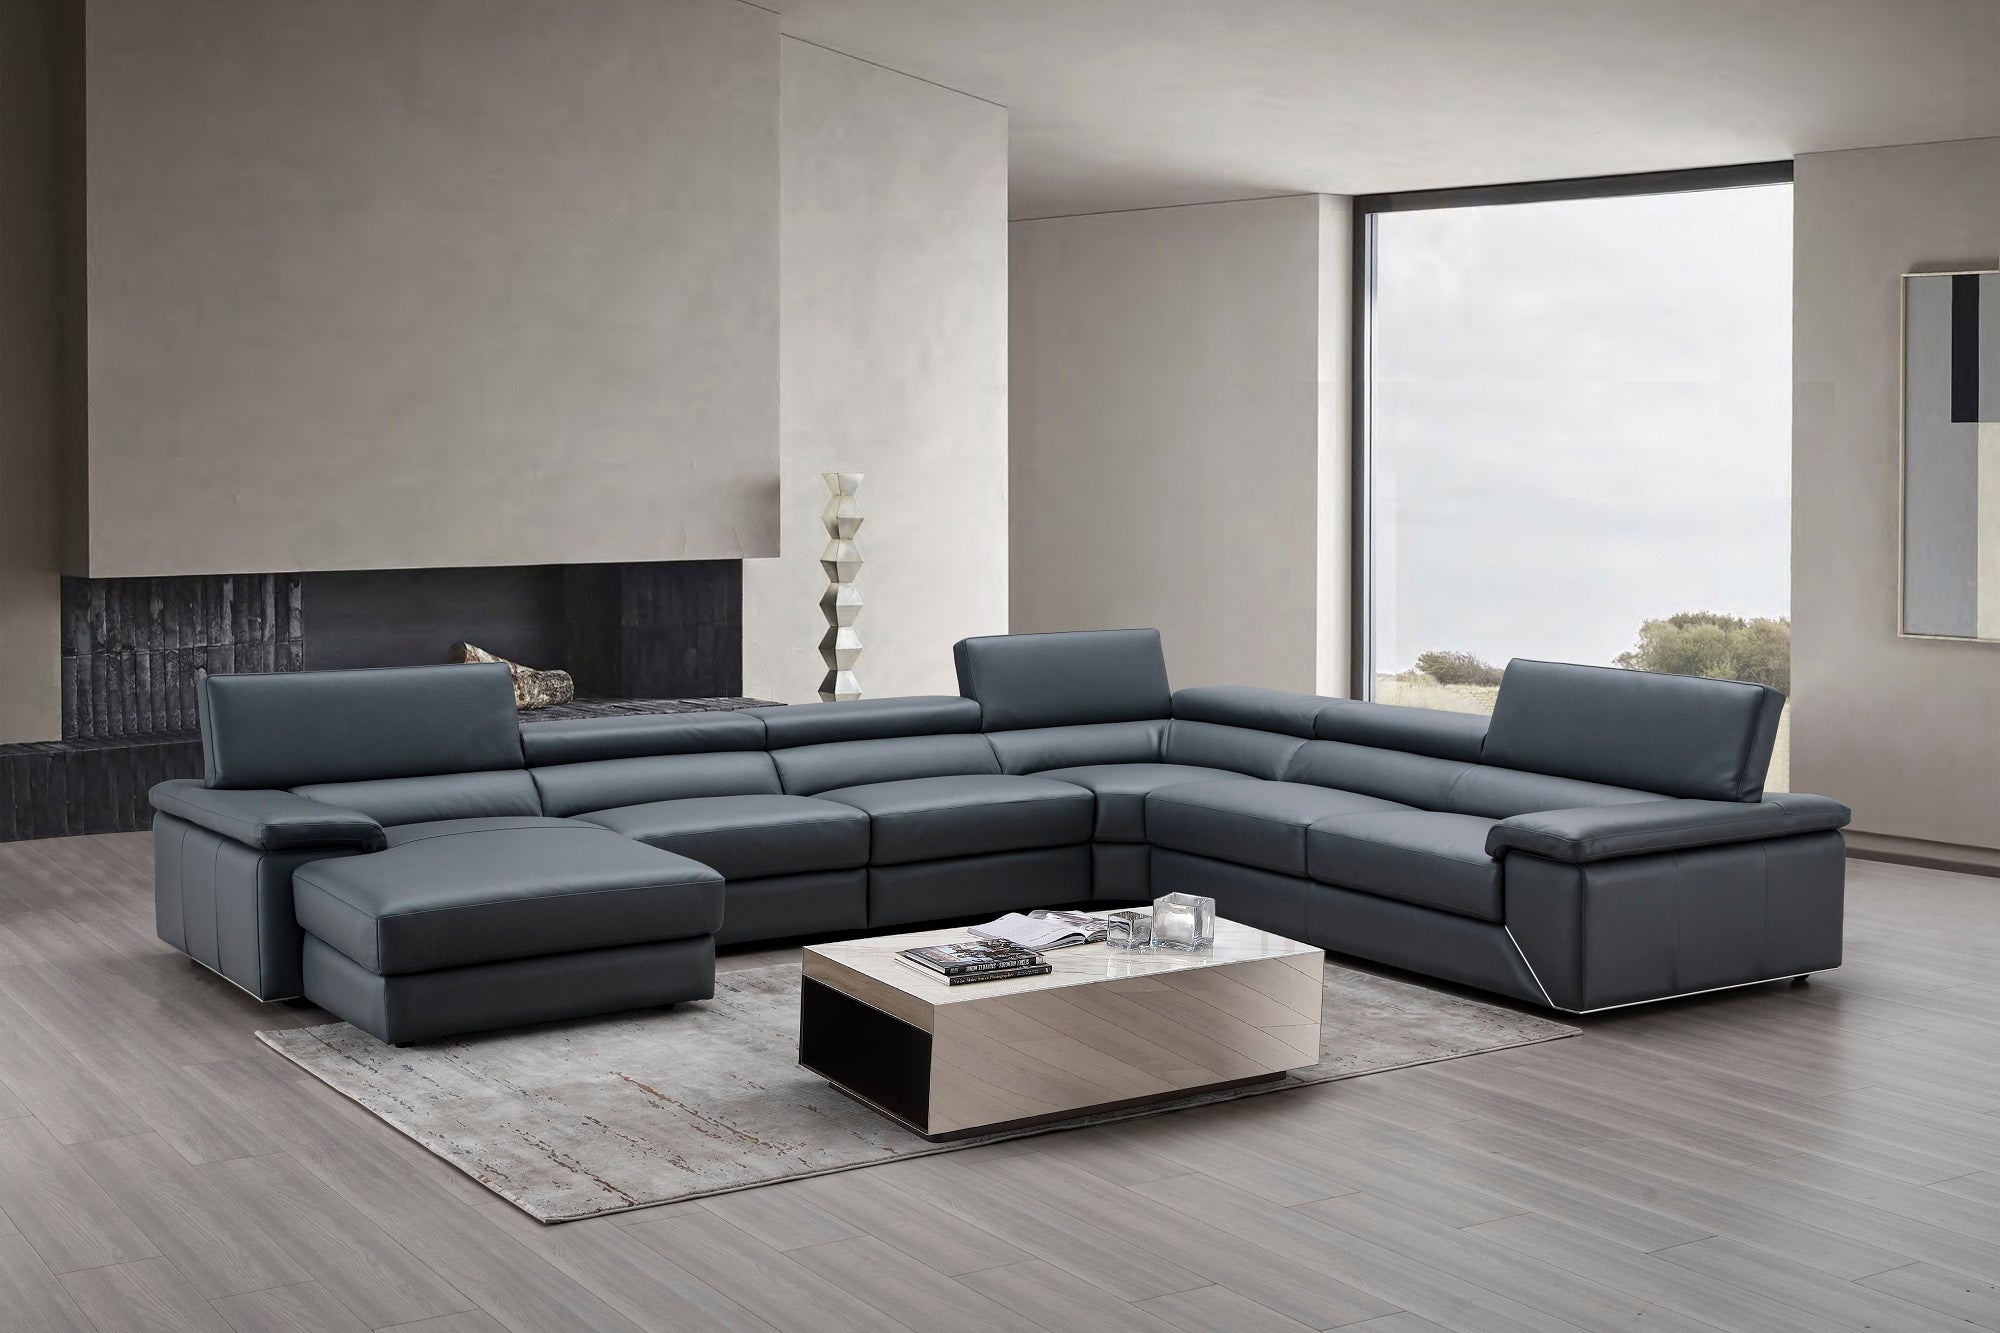 Kobe Premium Leather Sectional in Blue Grey